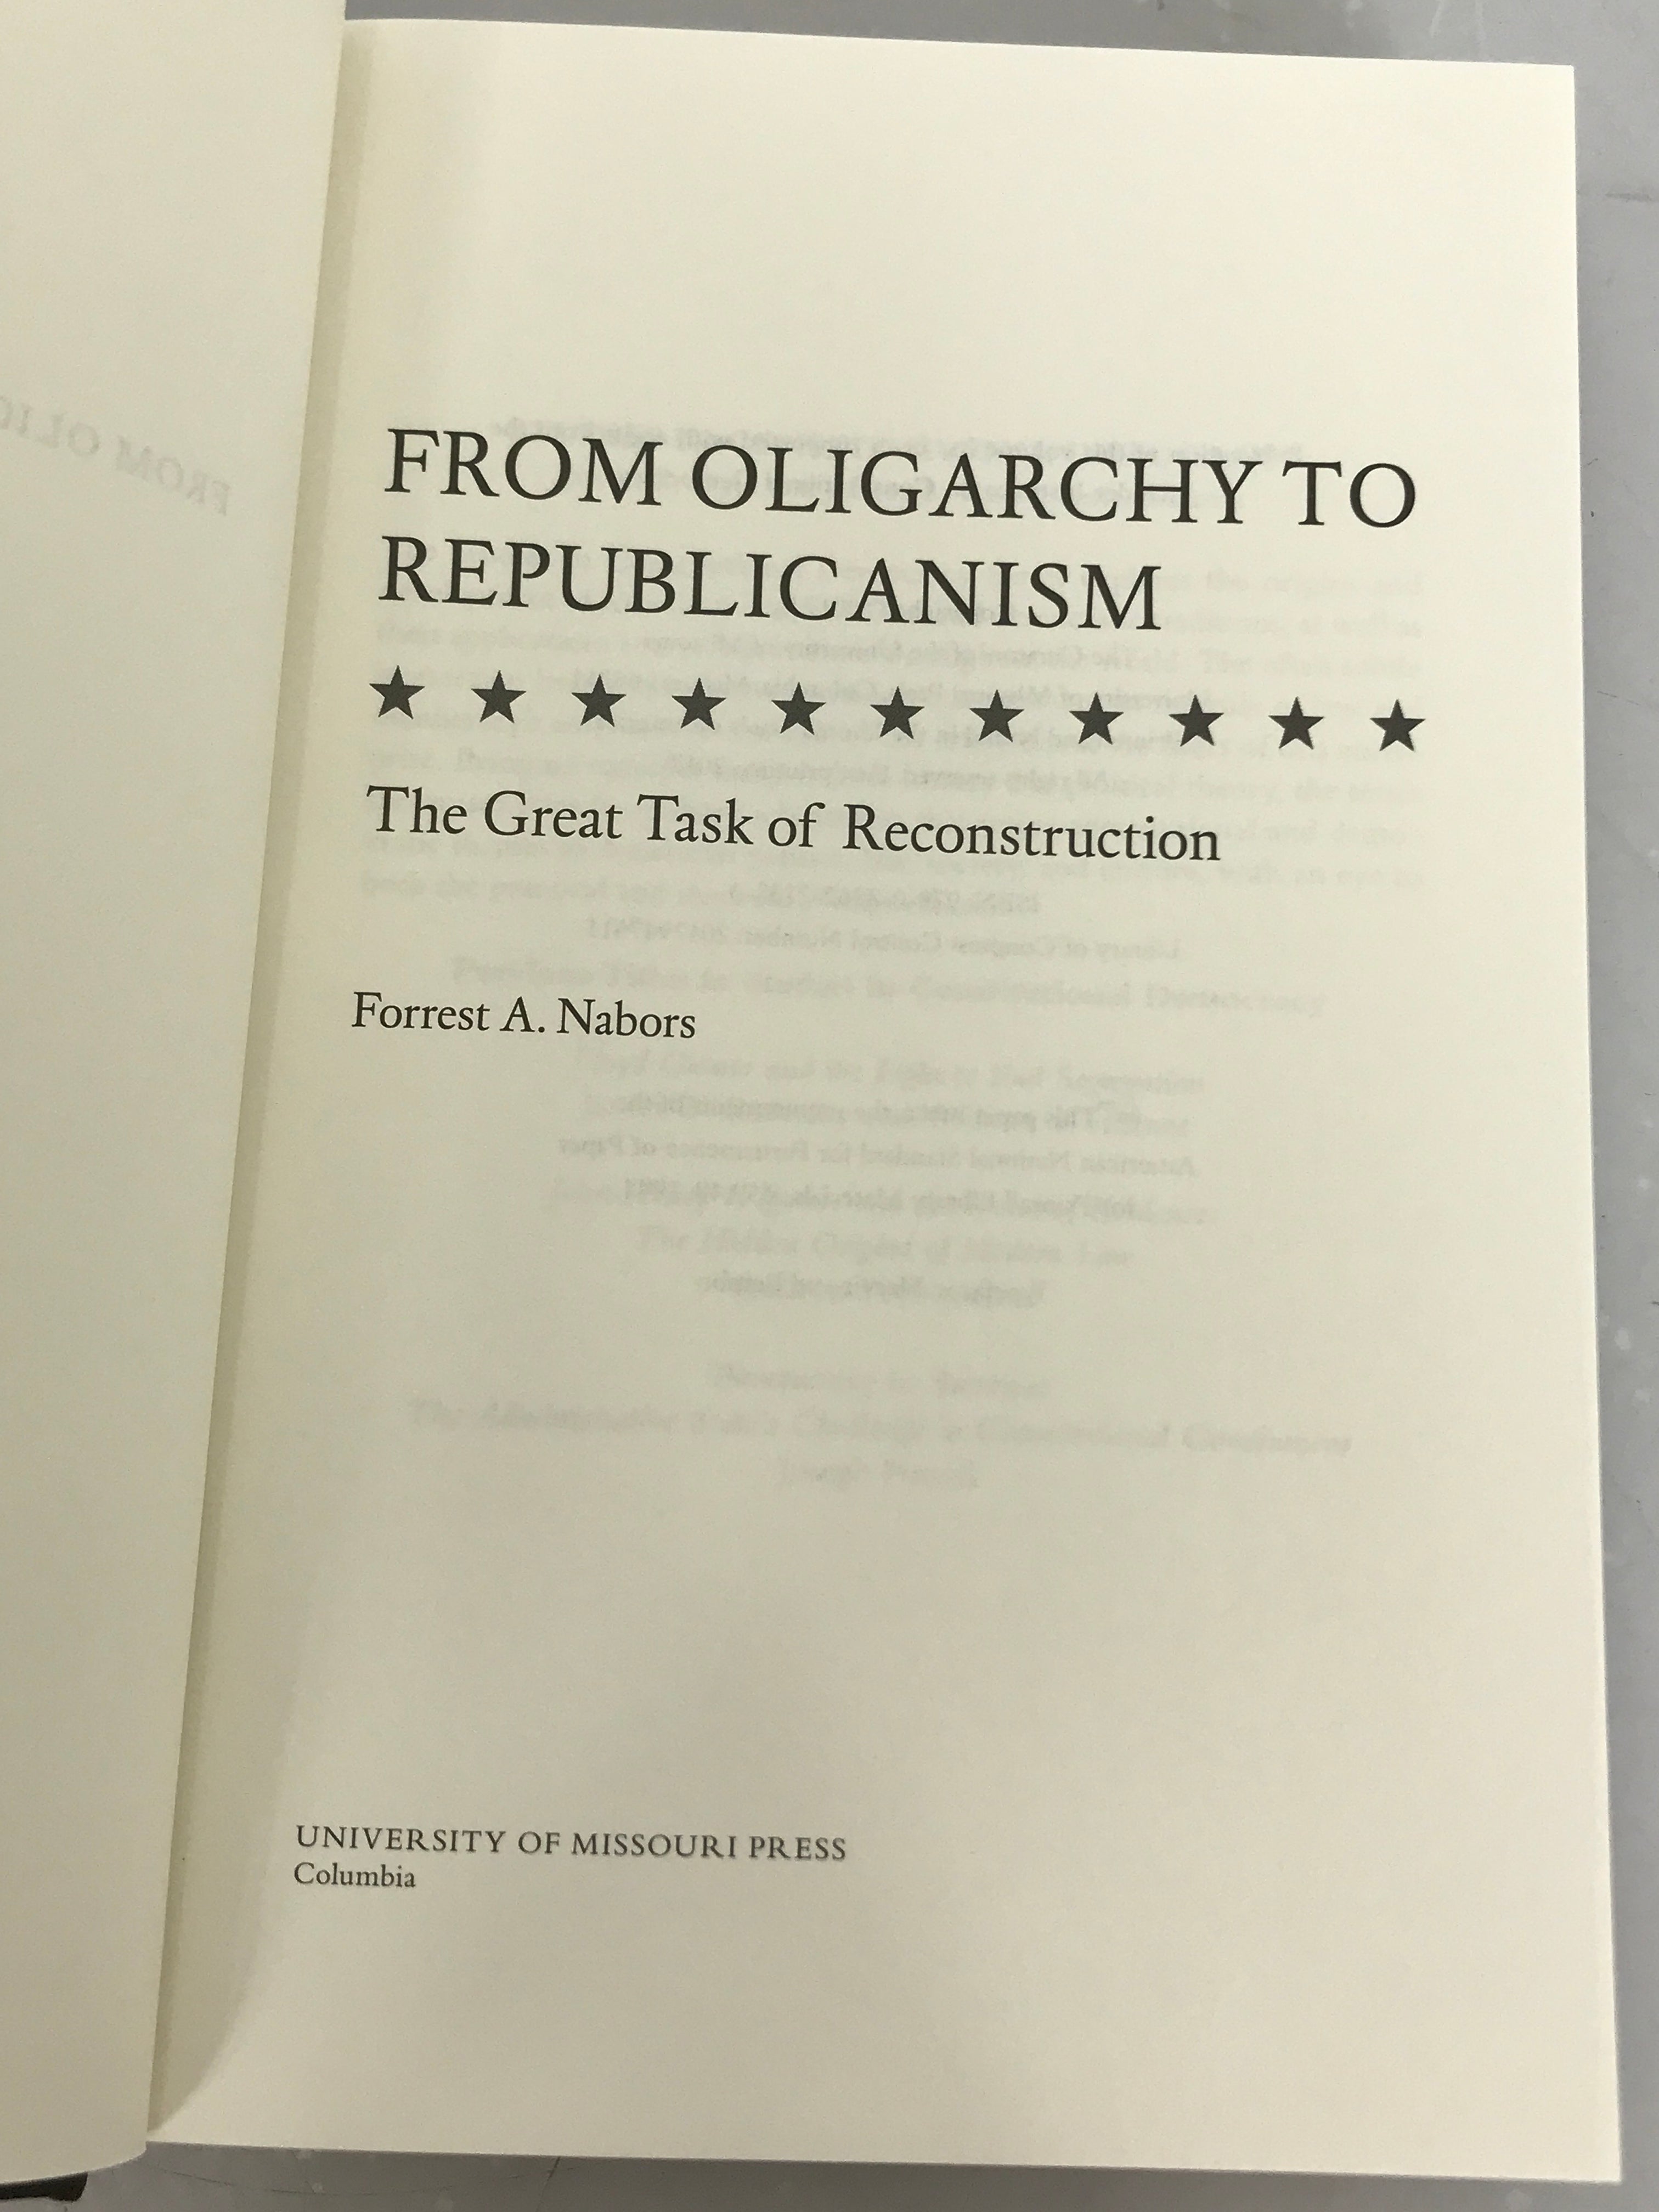 From Oligarchy to Republicanism by Forrest A. Nabors Signed Copy First Printing 2017 HC DJ